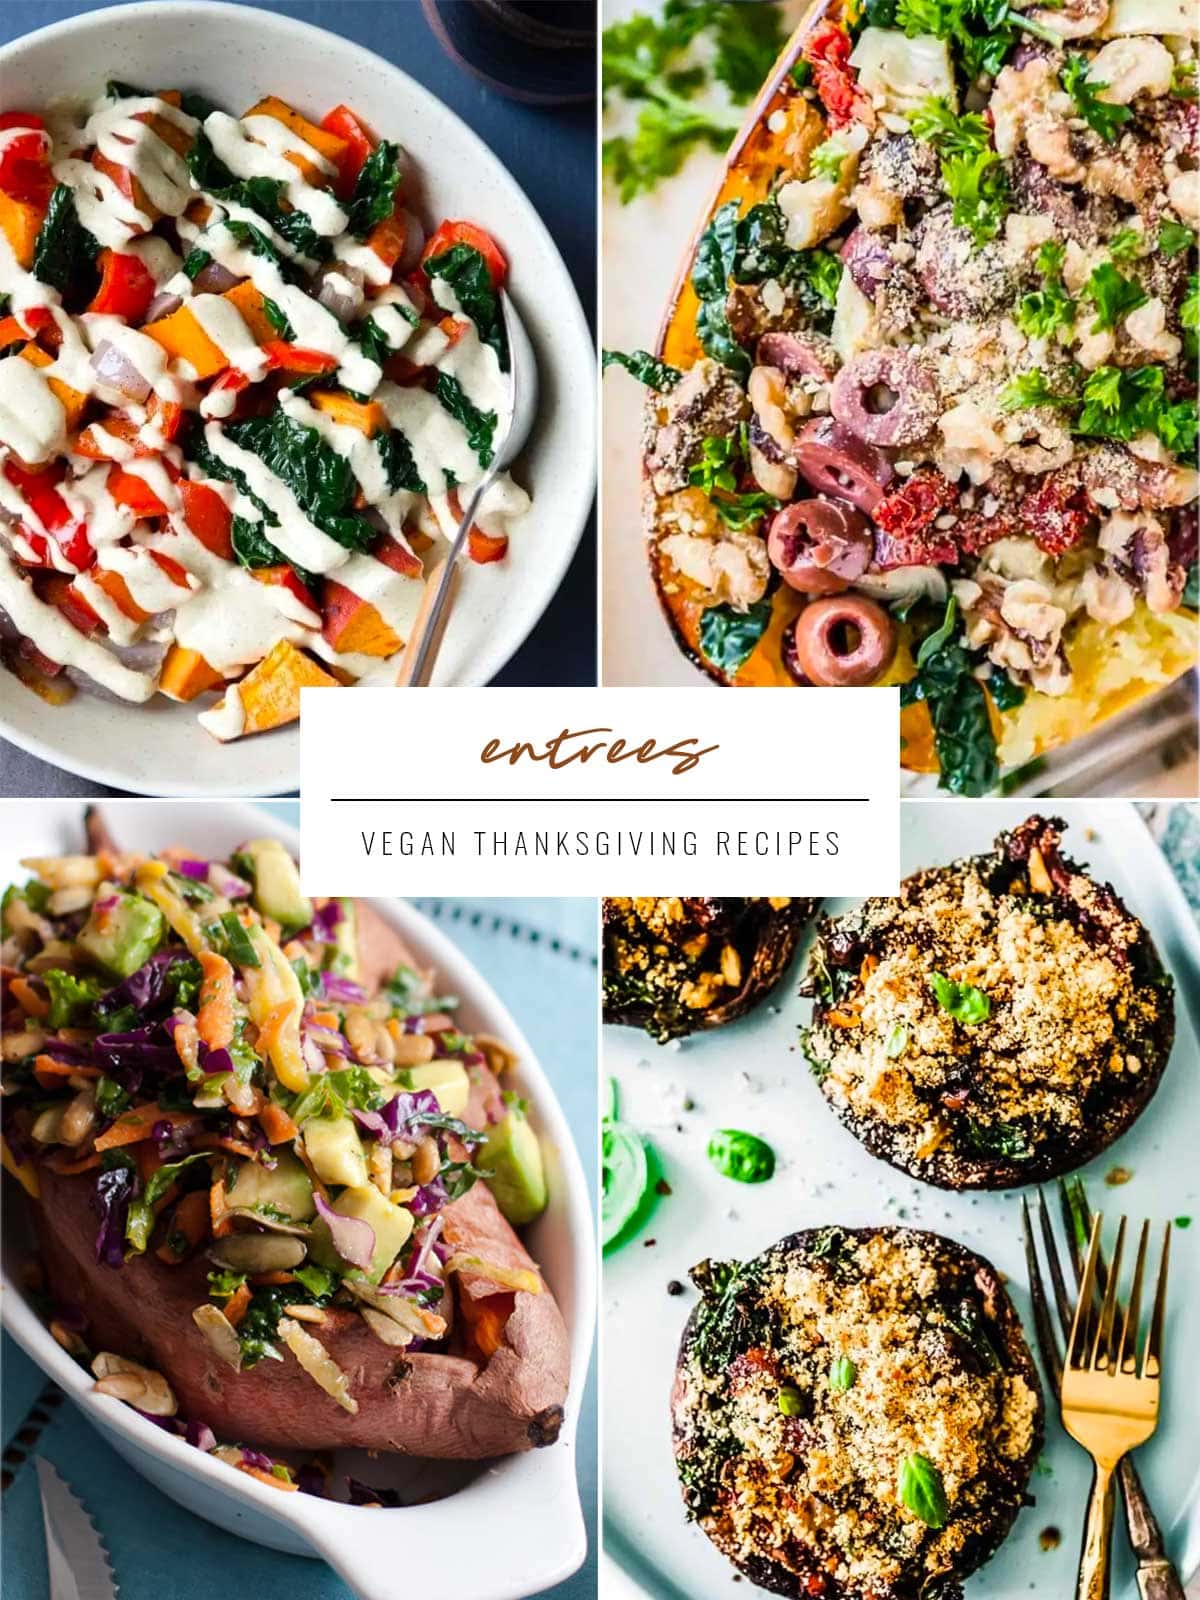 4 images with the words Entrees for Vegan Thanksgiving Main Dishes. Recipes include roasted veggies in hemp sauce, spaghetti squash, loaded sweet potato and stuffed portobello mushrooms.